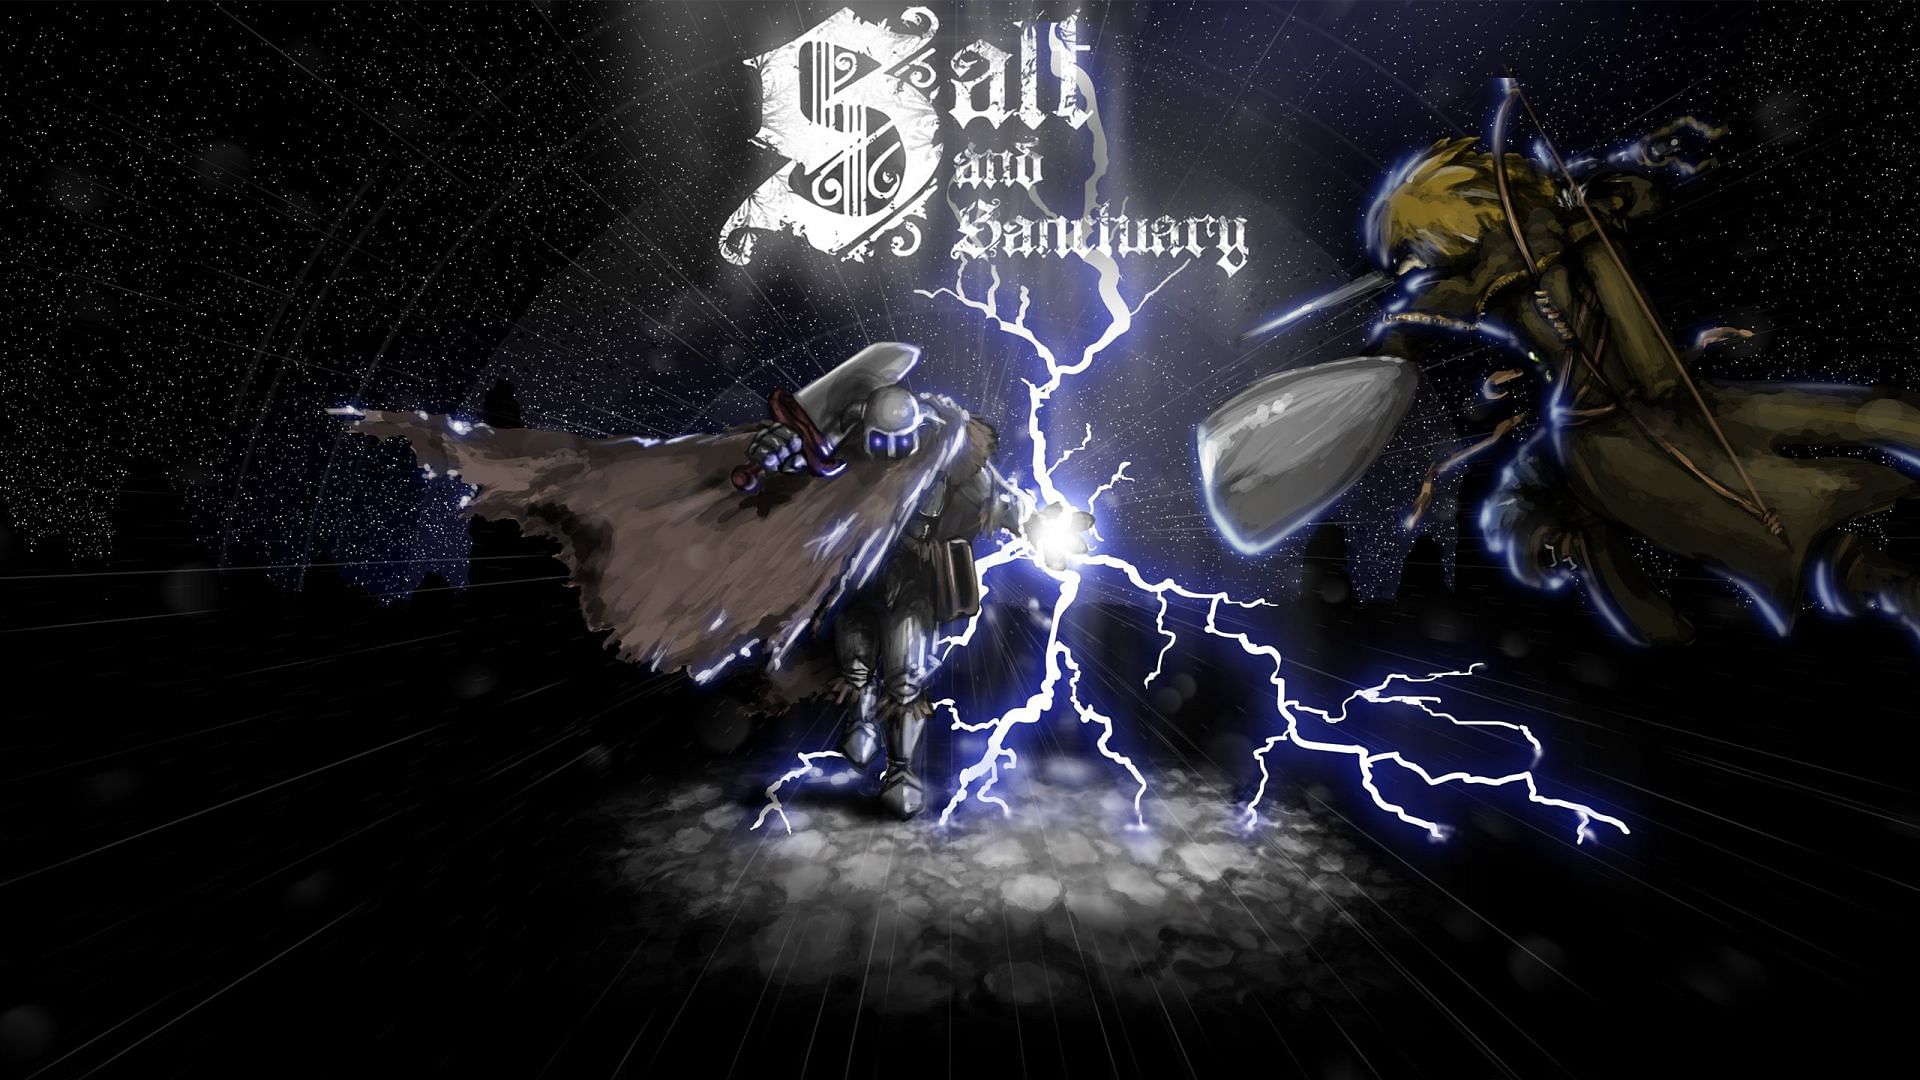 Salt and Sanctuary was released on March 16, 2016, for PC, PS4, Xbox One, PSVita, and the Switch (Image via Epic Games)